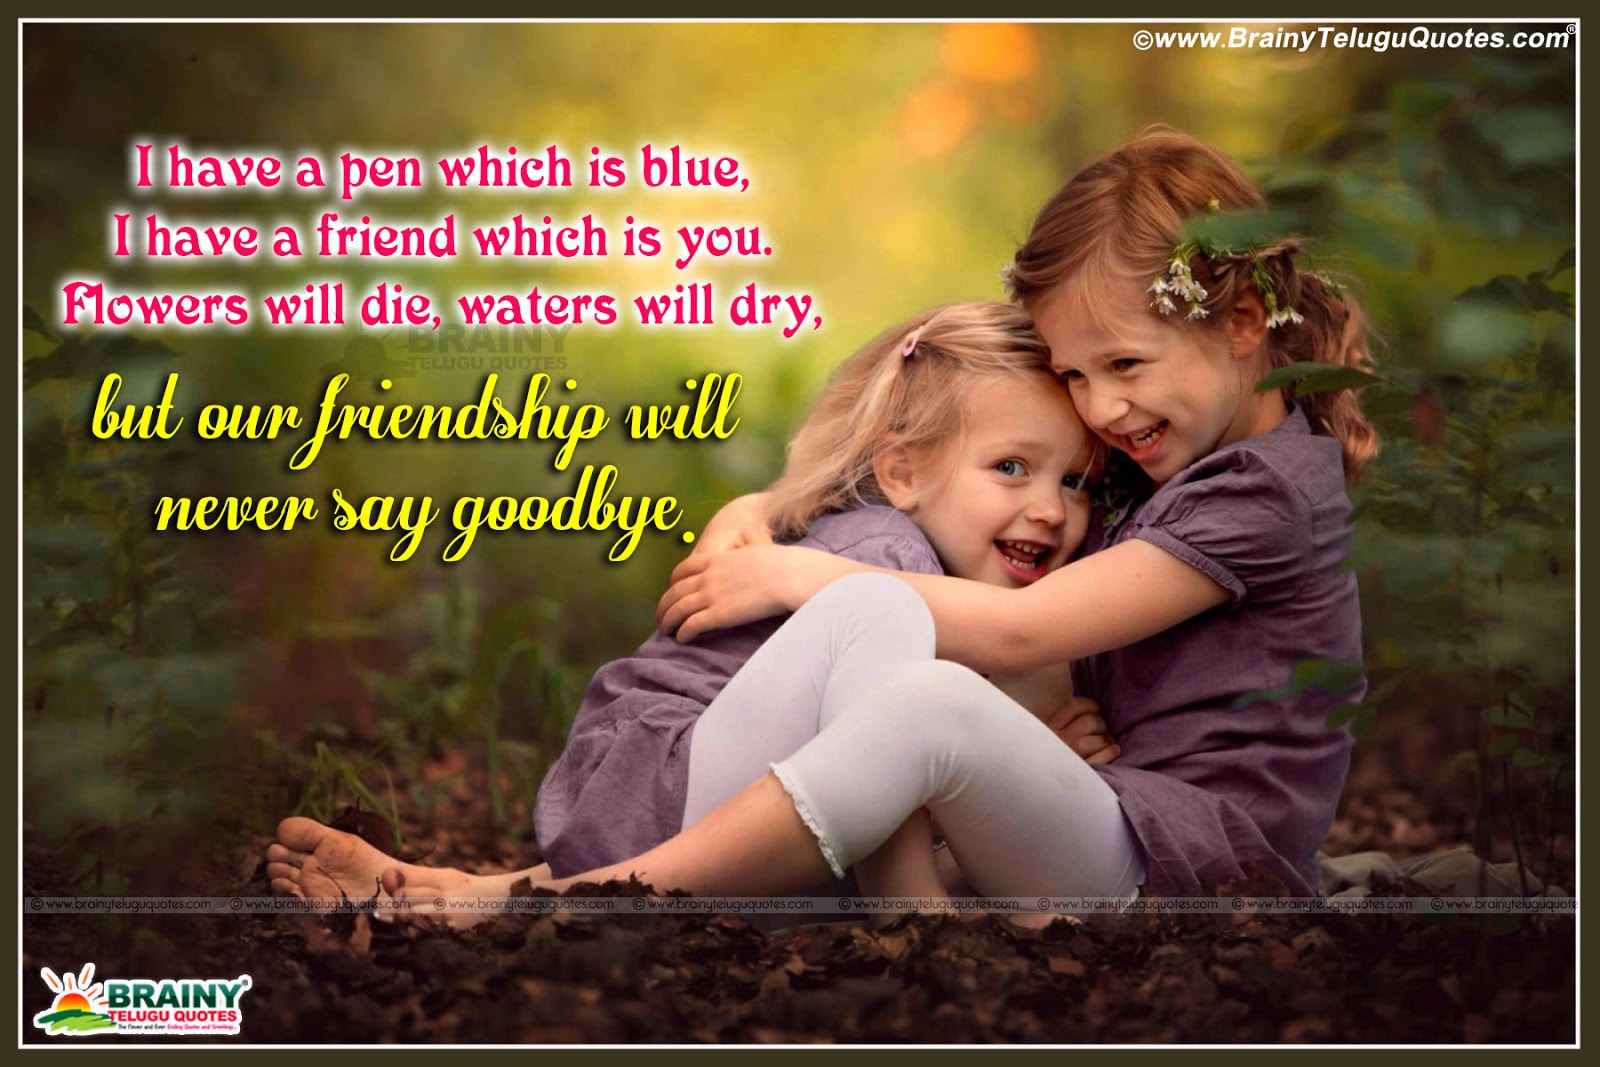 Inspirqational Good Friendship Quotations in English with cute children